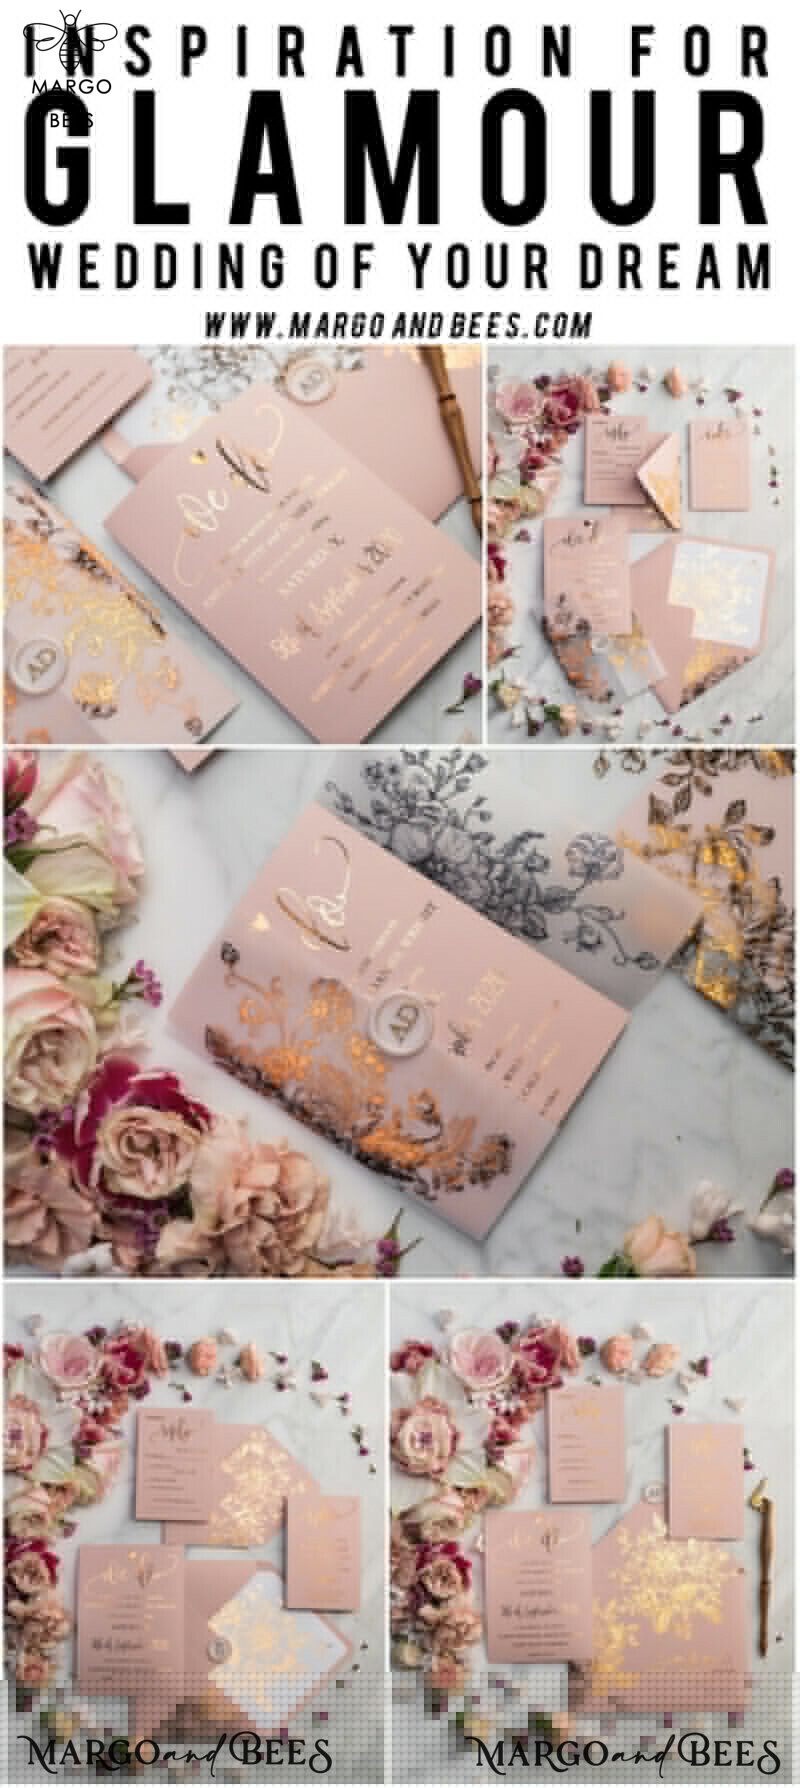 Luxury Vellum Gold Foil Wedding Invitations: Elegant Blush Pink Invitation Suite with Glamour Wedding Cards and Golden Shine-61